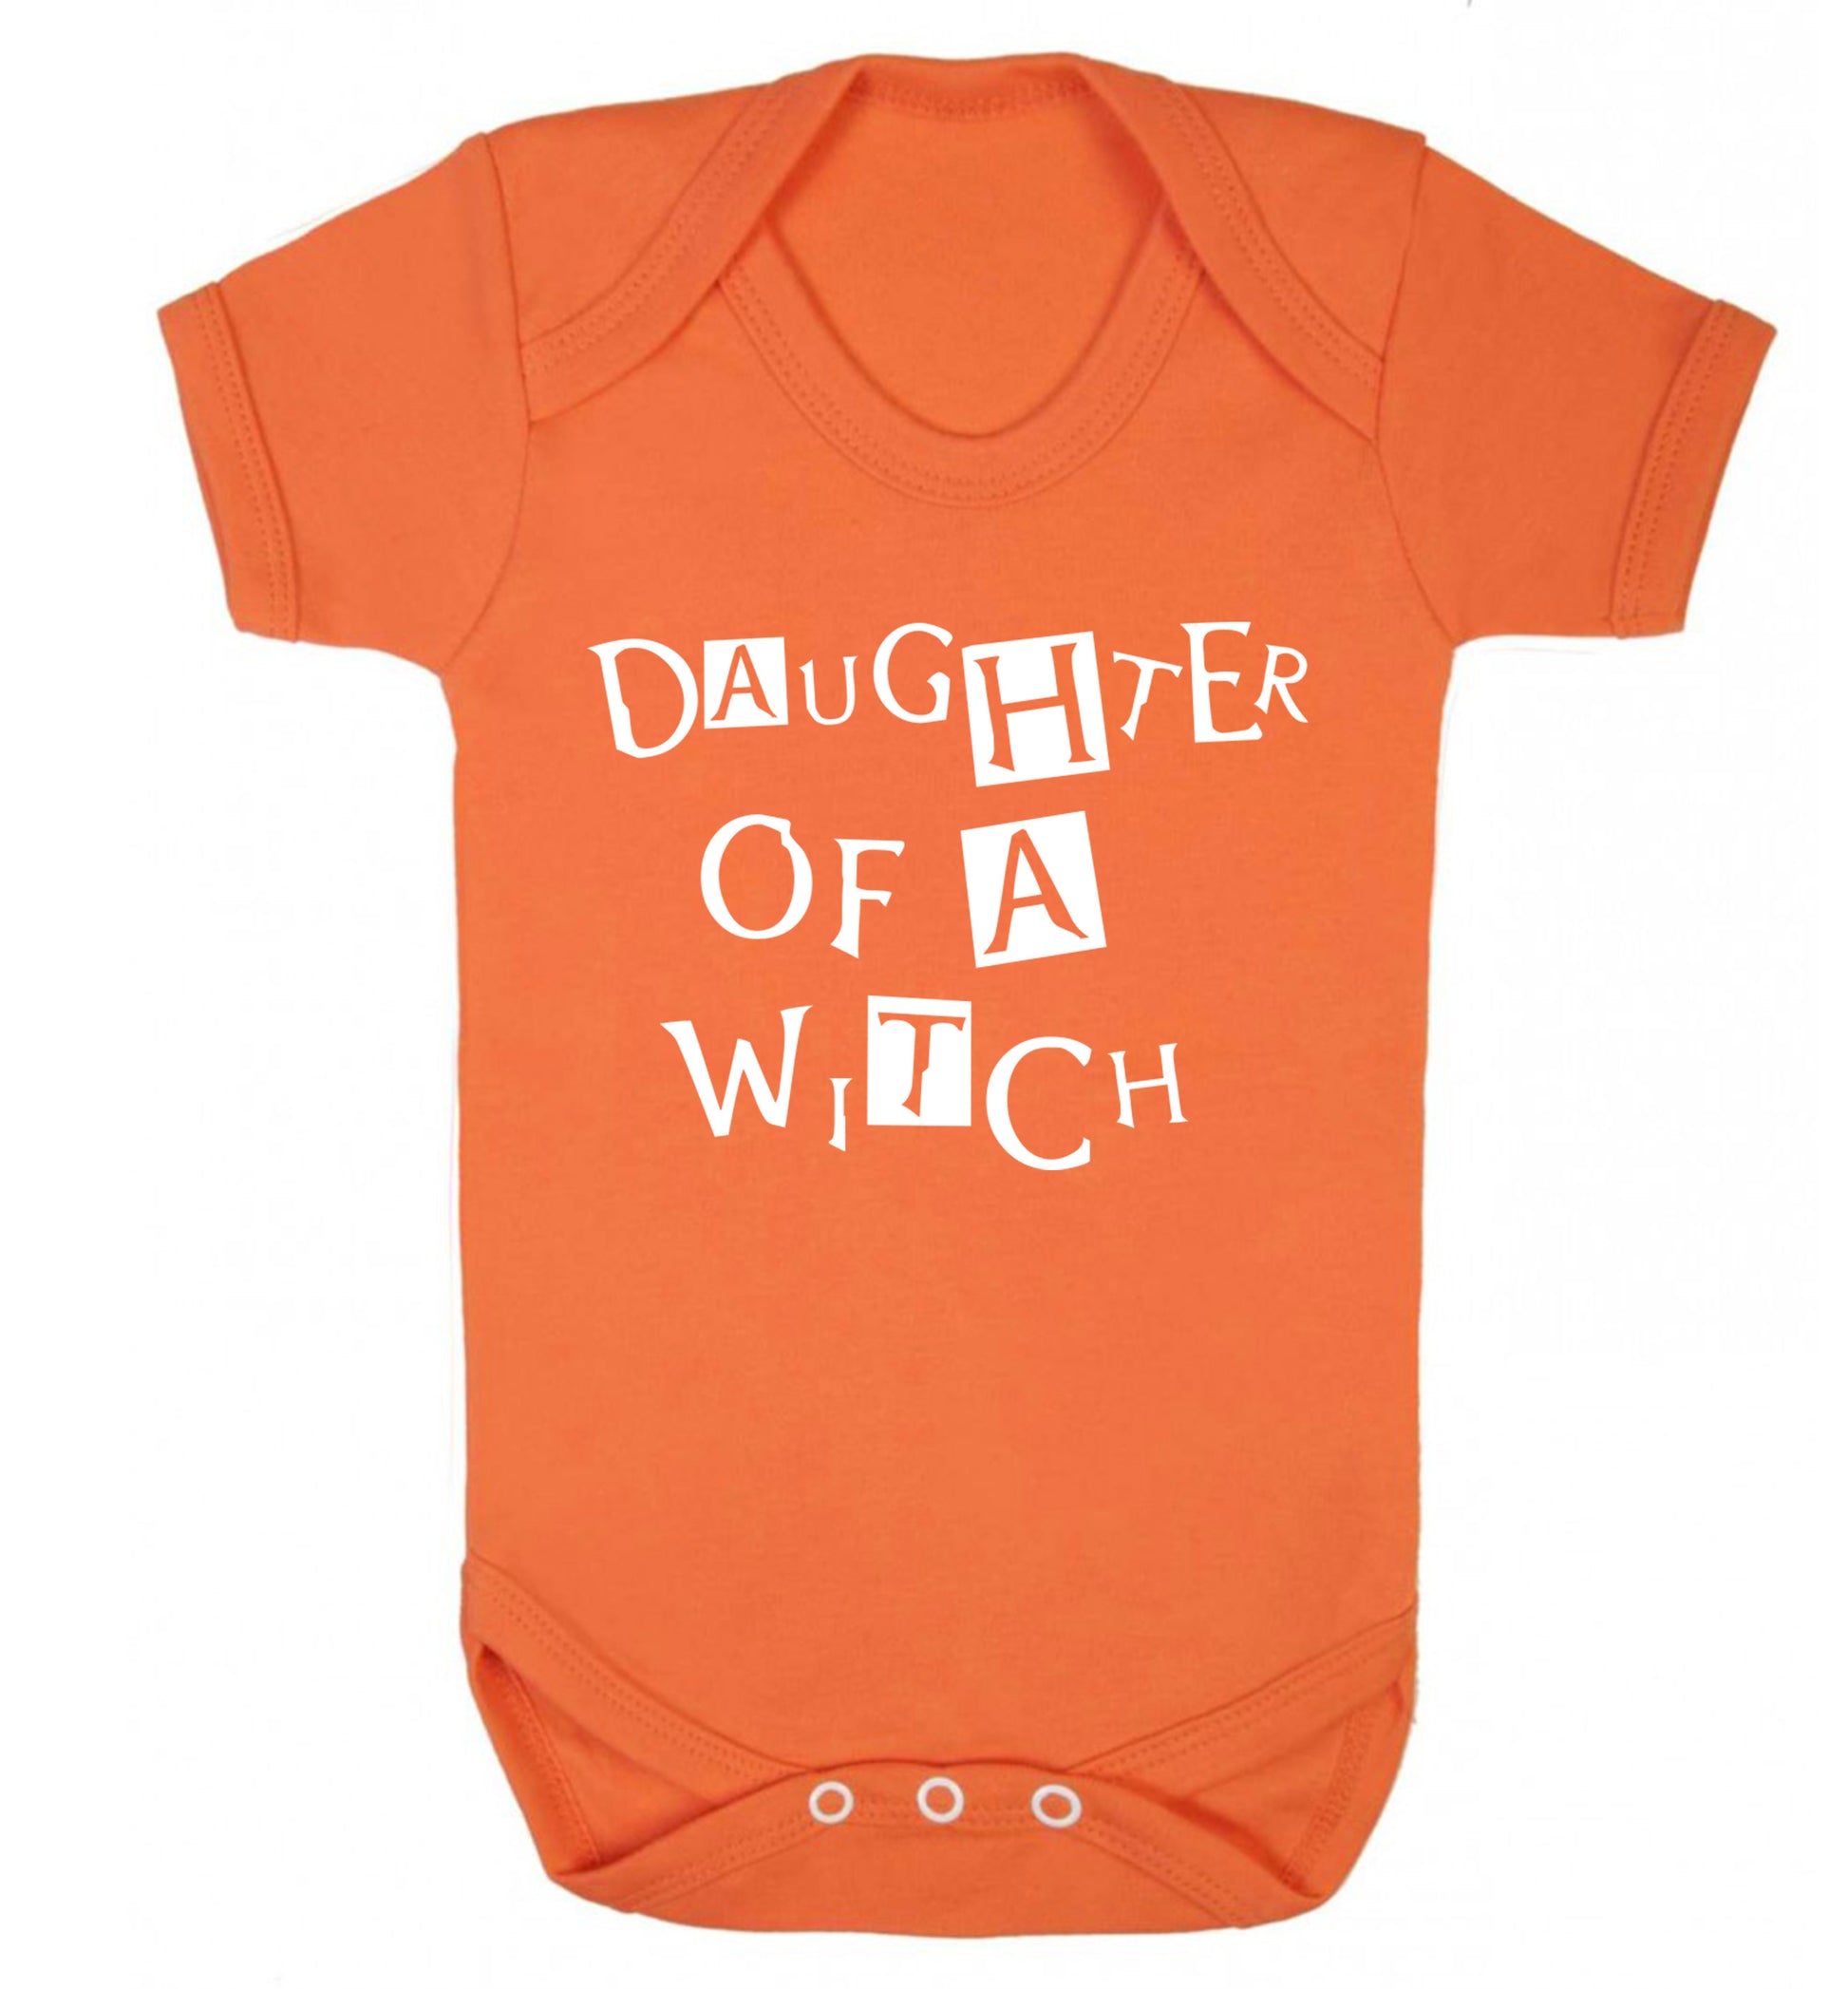 Daughter of a witch Baby Vest orange 18-24 months